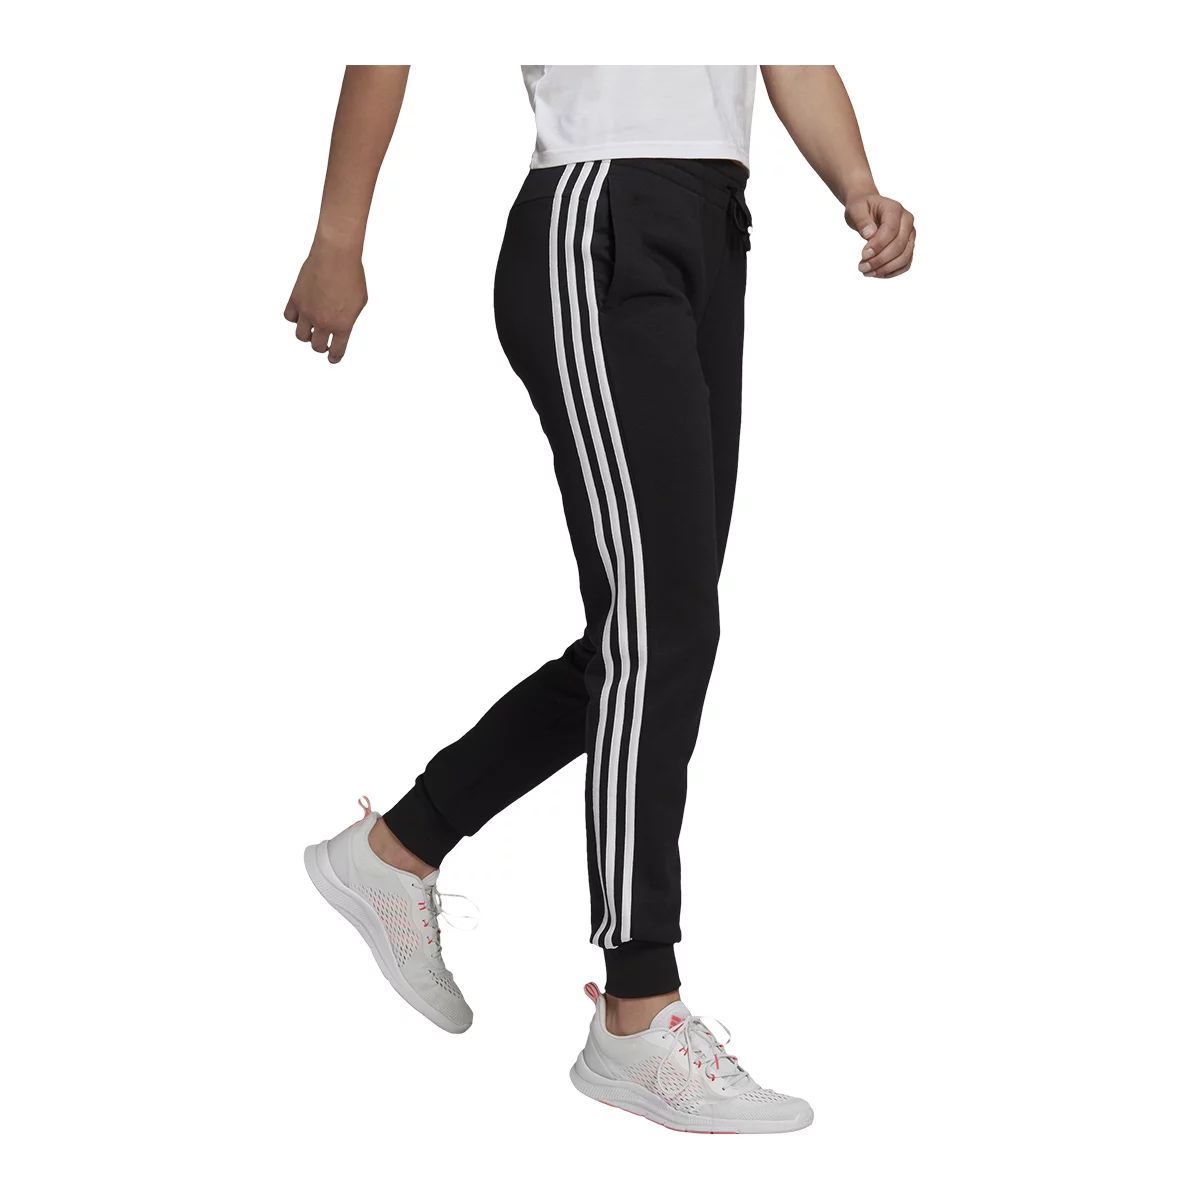 Discover more than 150 adidas 3 stripe pants womens